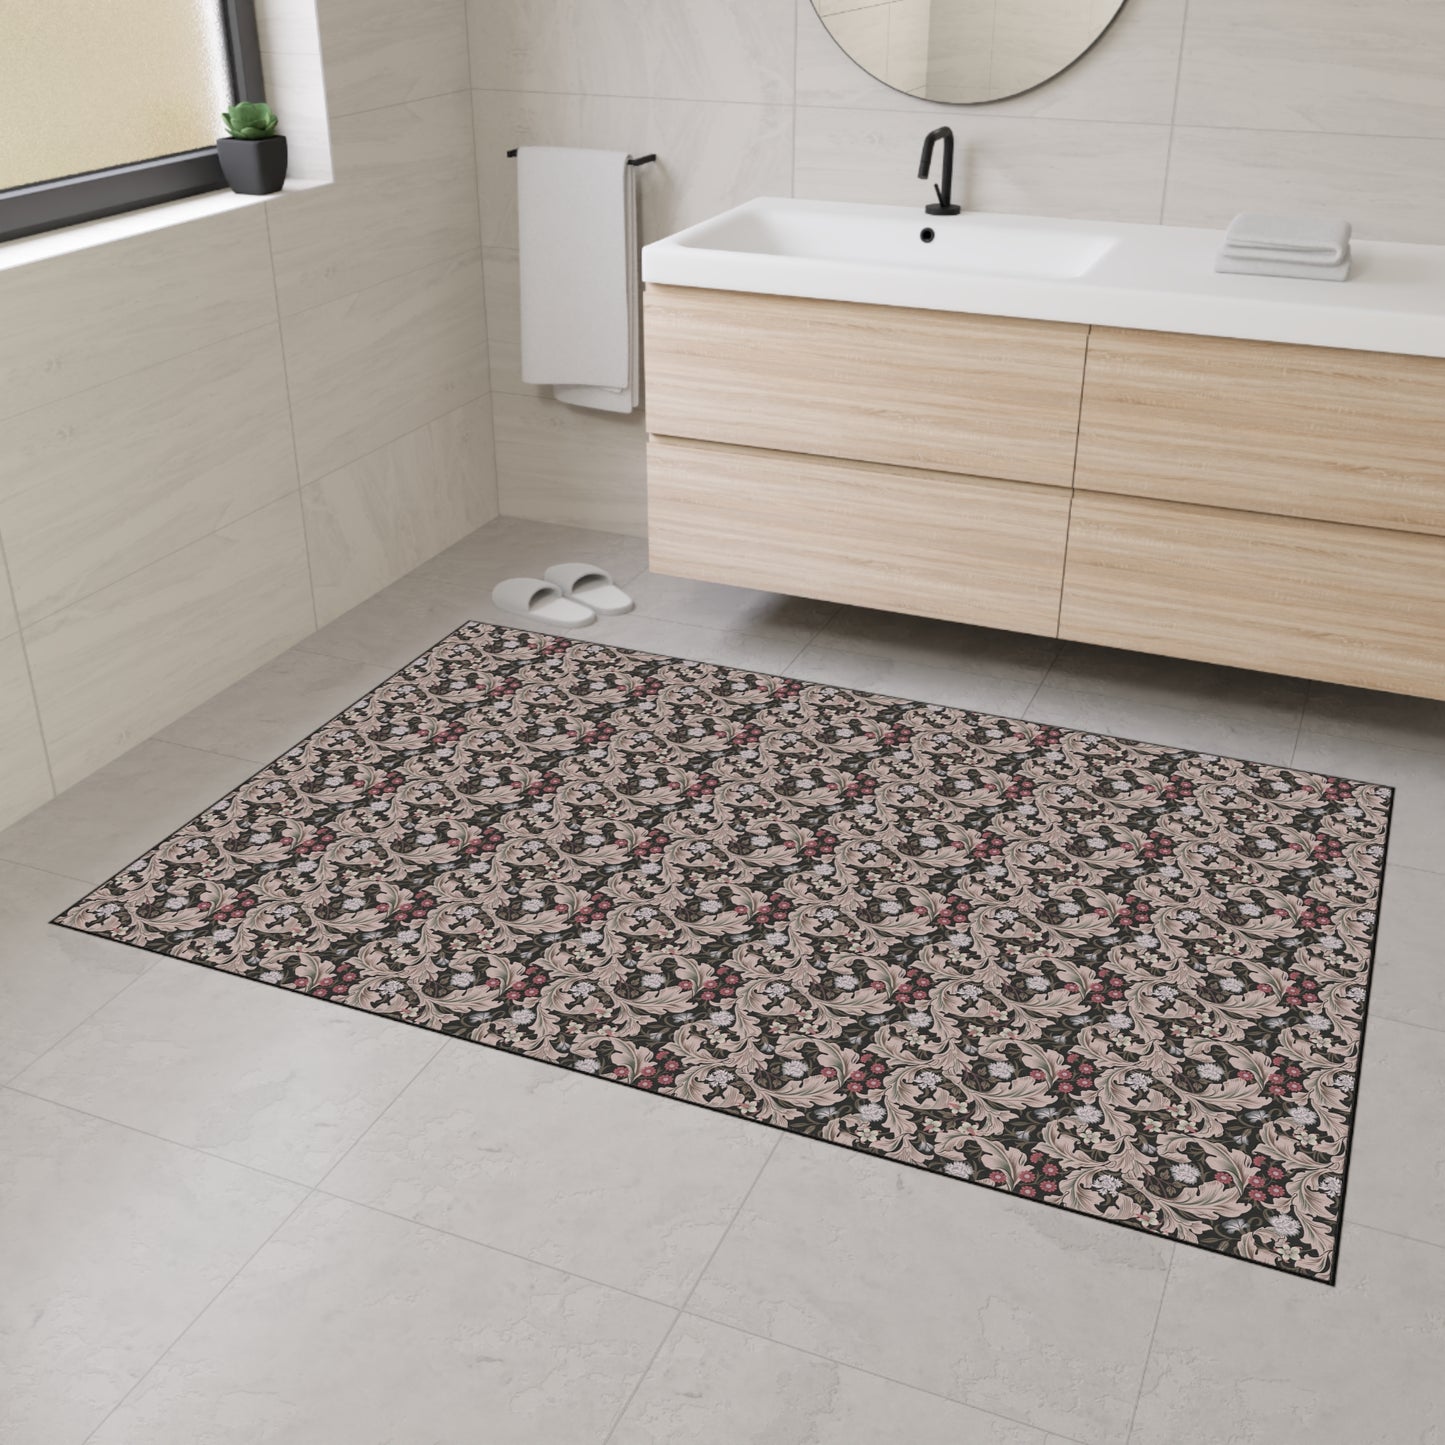 william-morris-co-heavy-duty-floor-mat-leicester-collection-mocha-8